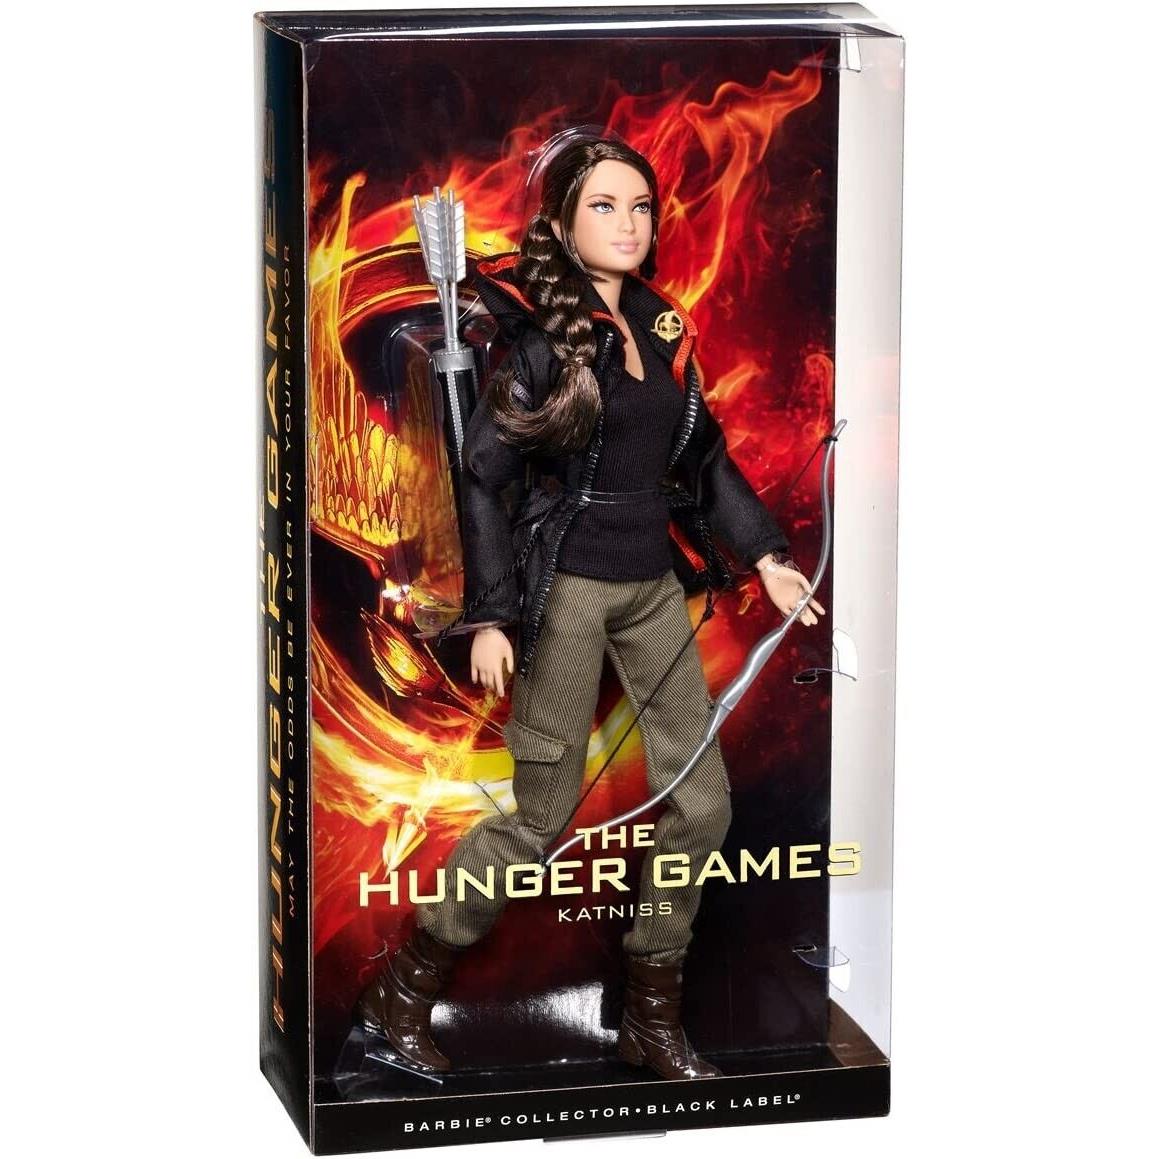 Barbie Collector Hunger Games 2012 Katniss Everdeen Doll Last One